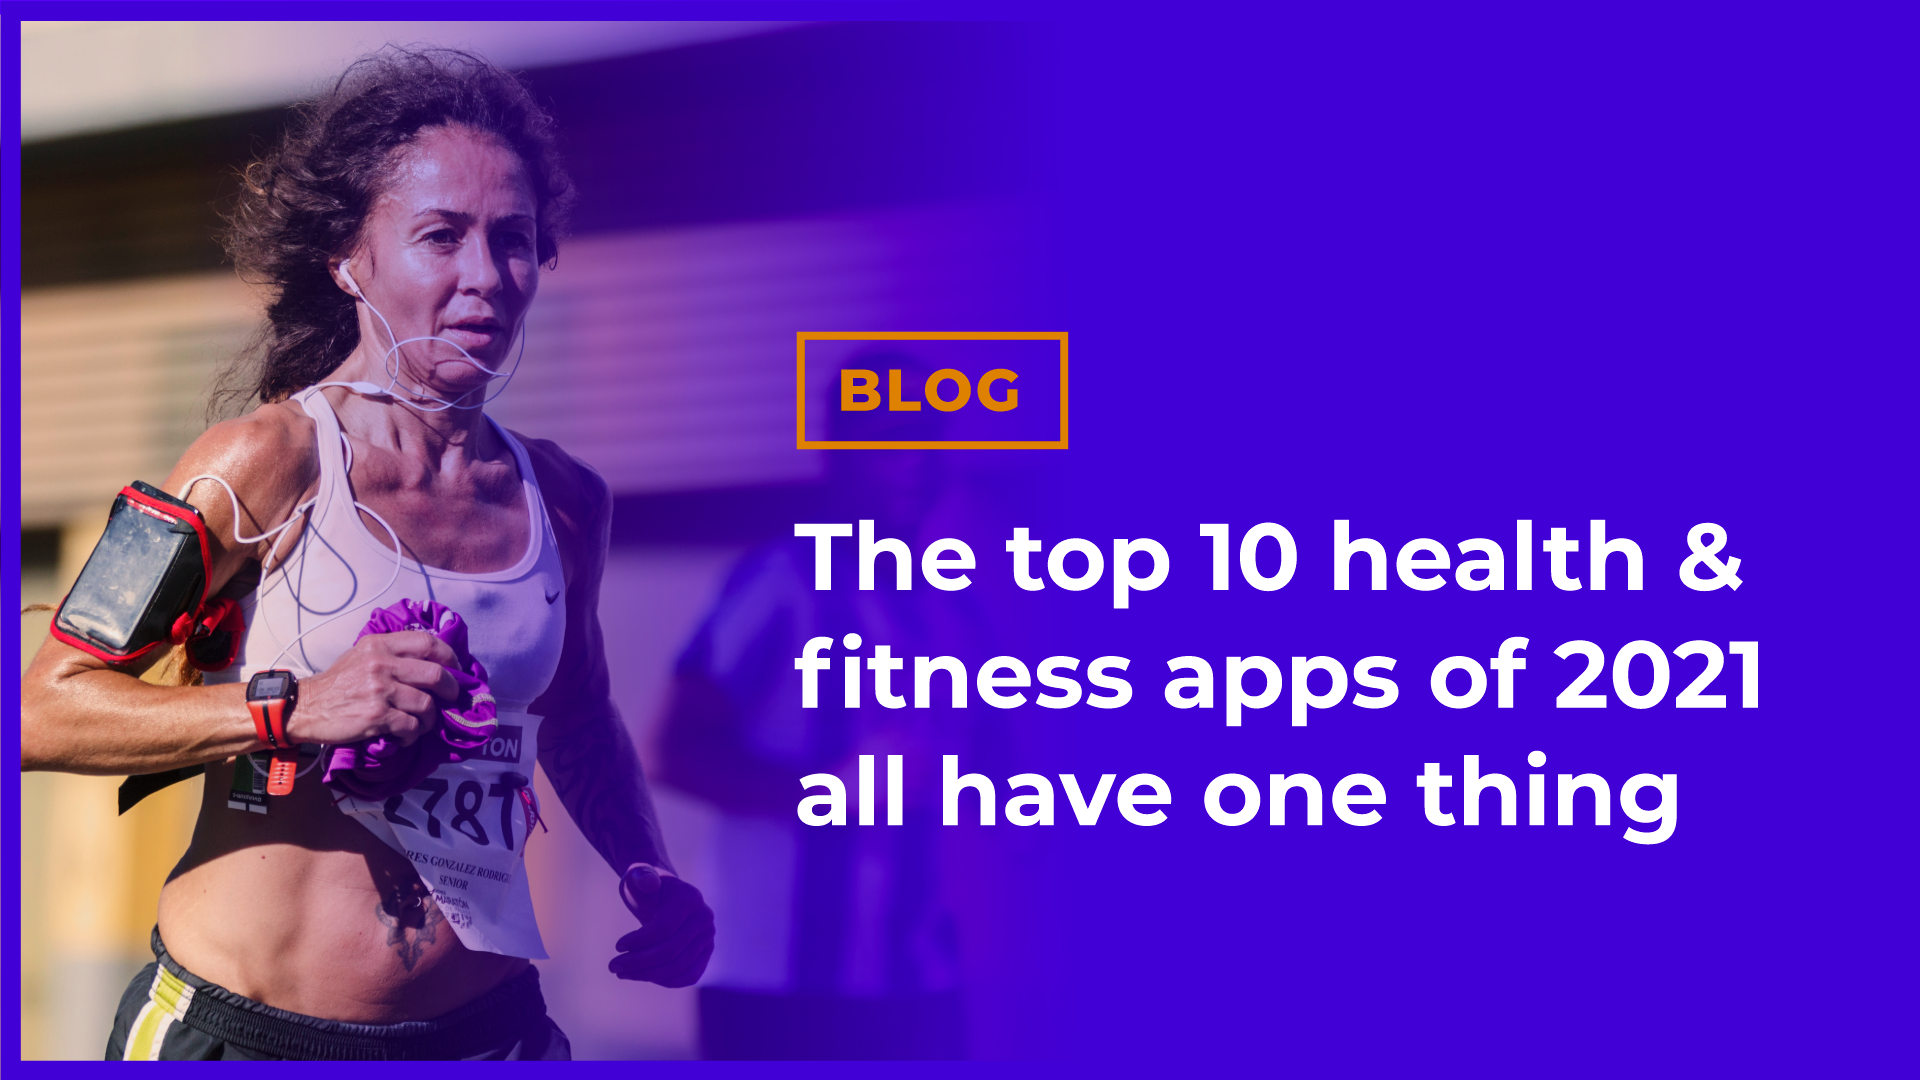 The top 10 health & fitness apps of 2021 all have one thing